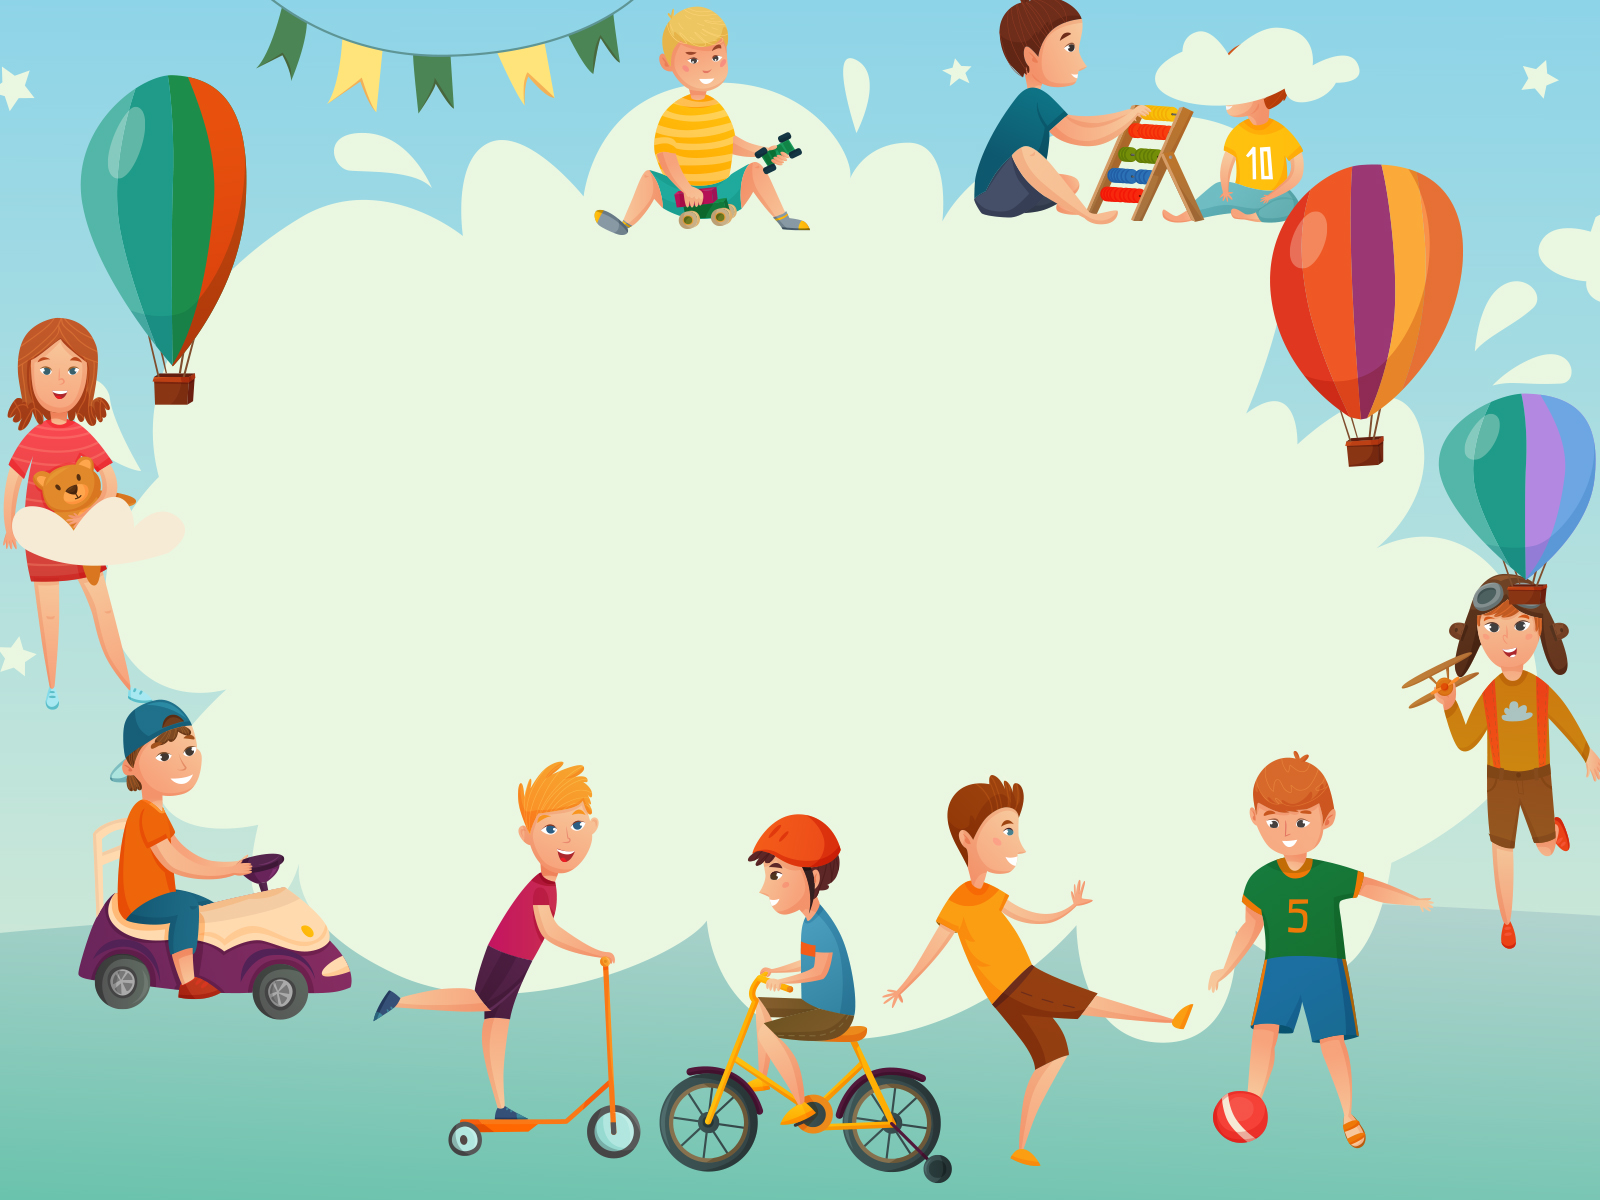 PowerPoint Background Templates For Kids